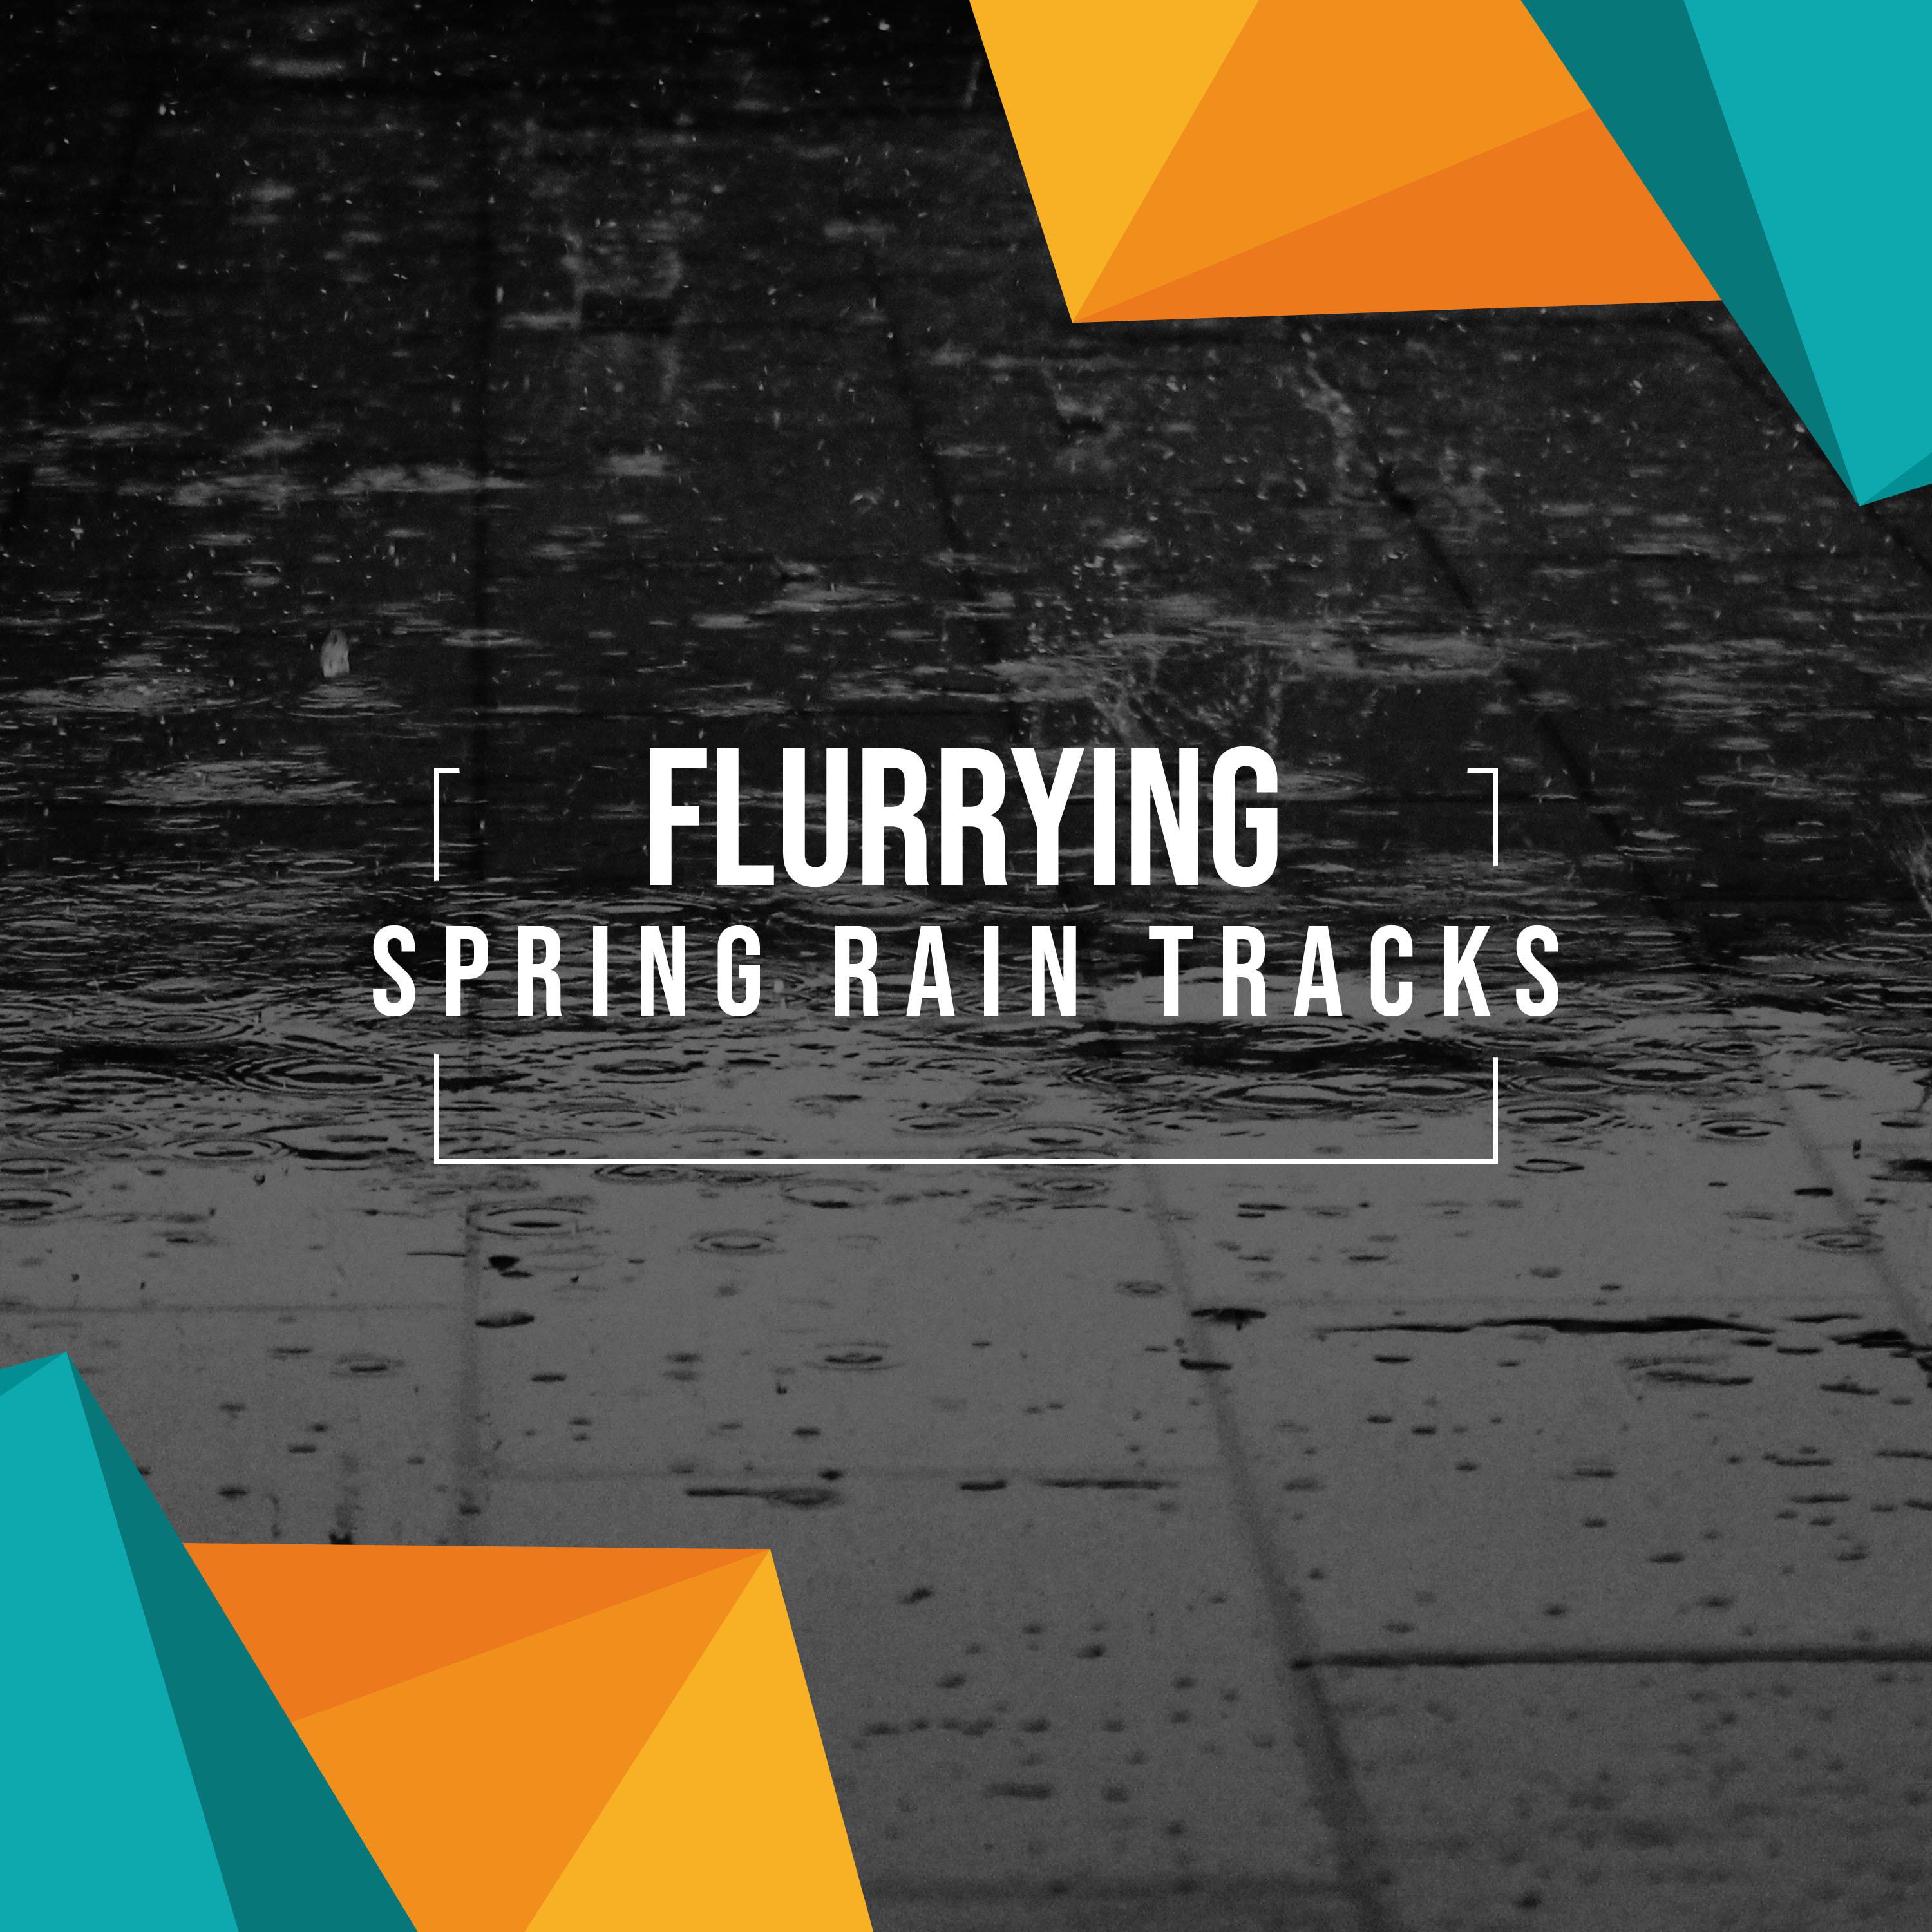 #16 Flurrying Spring Rain Tracks from Nature